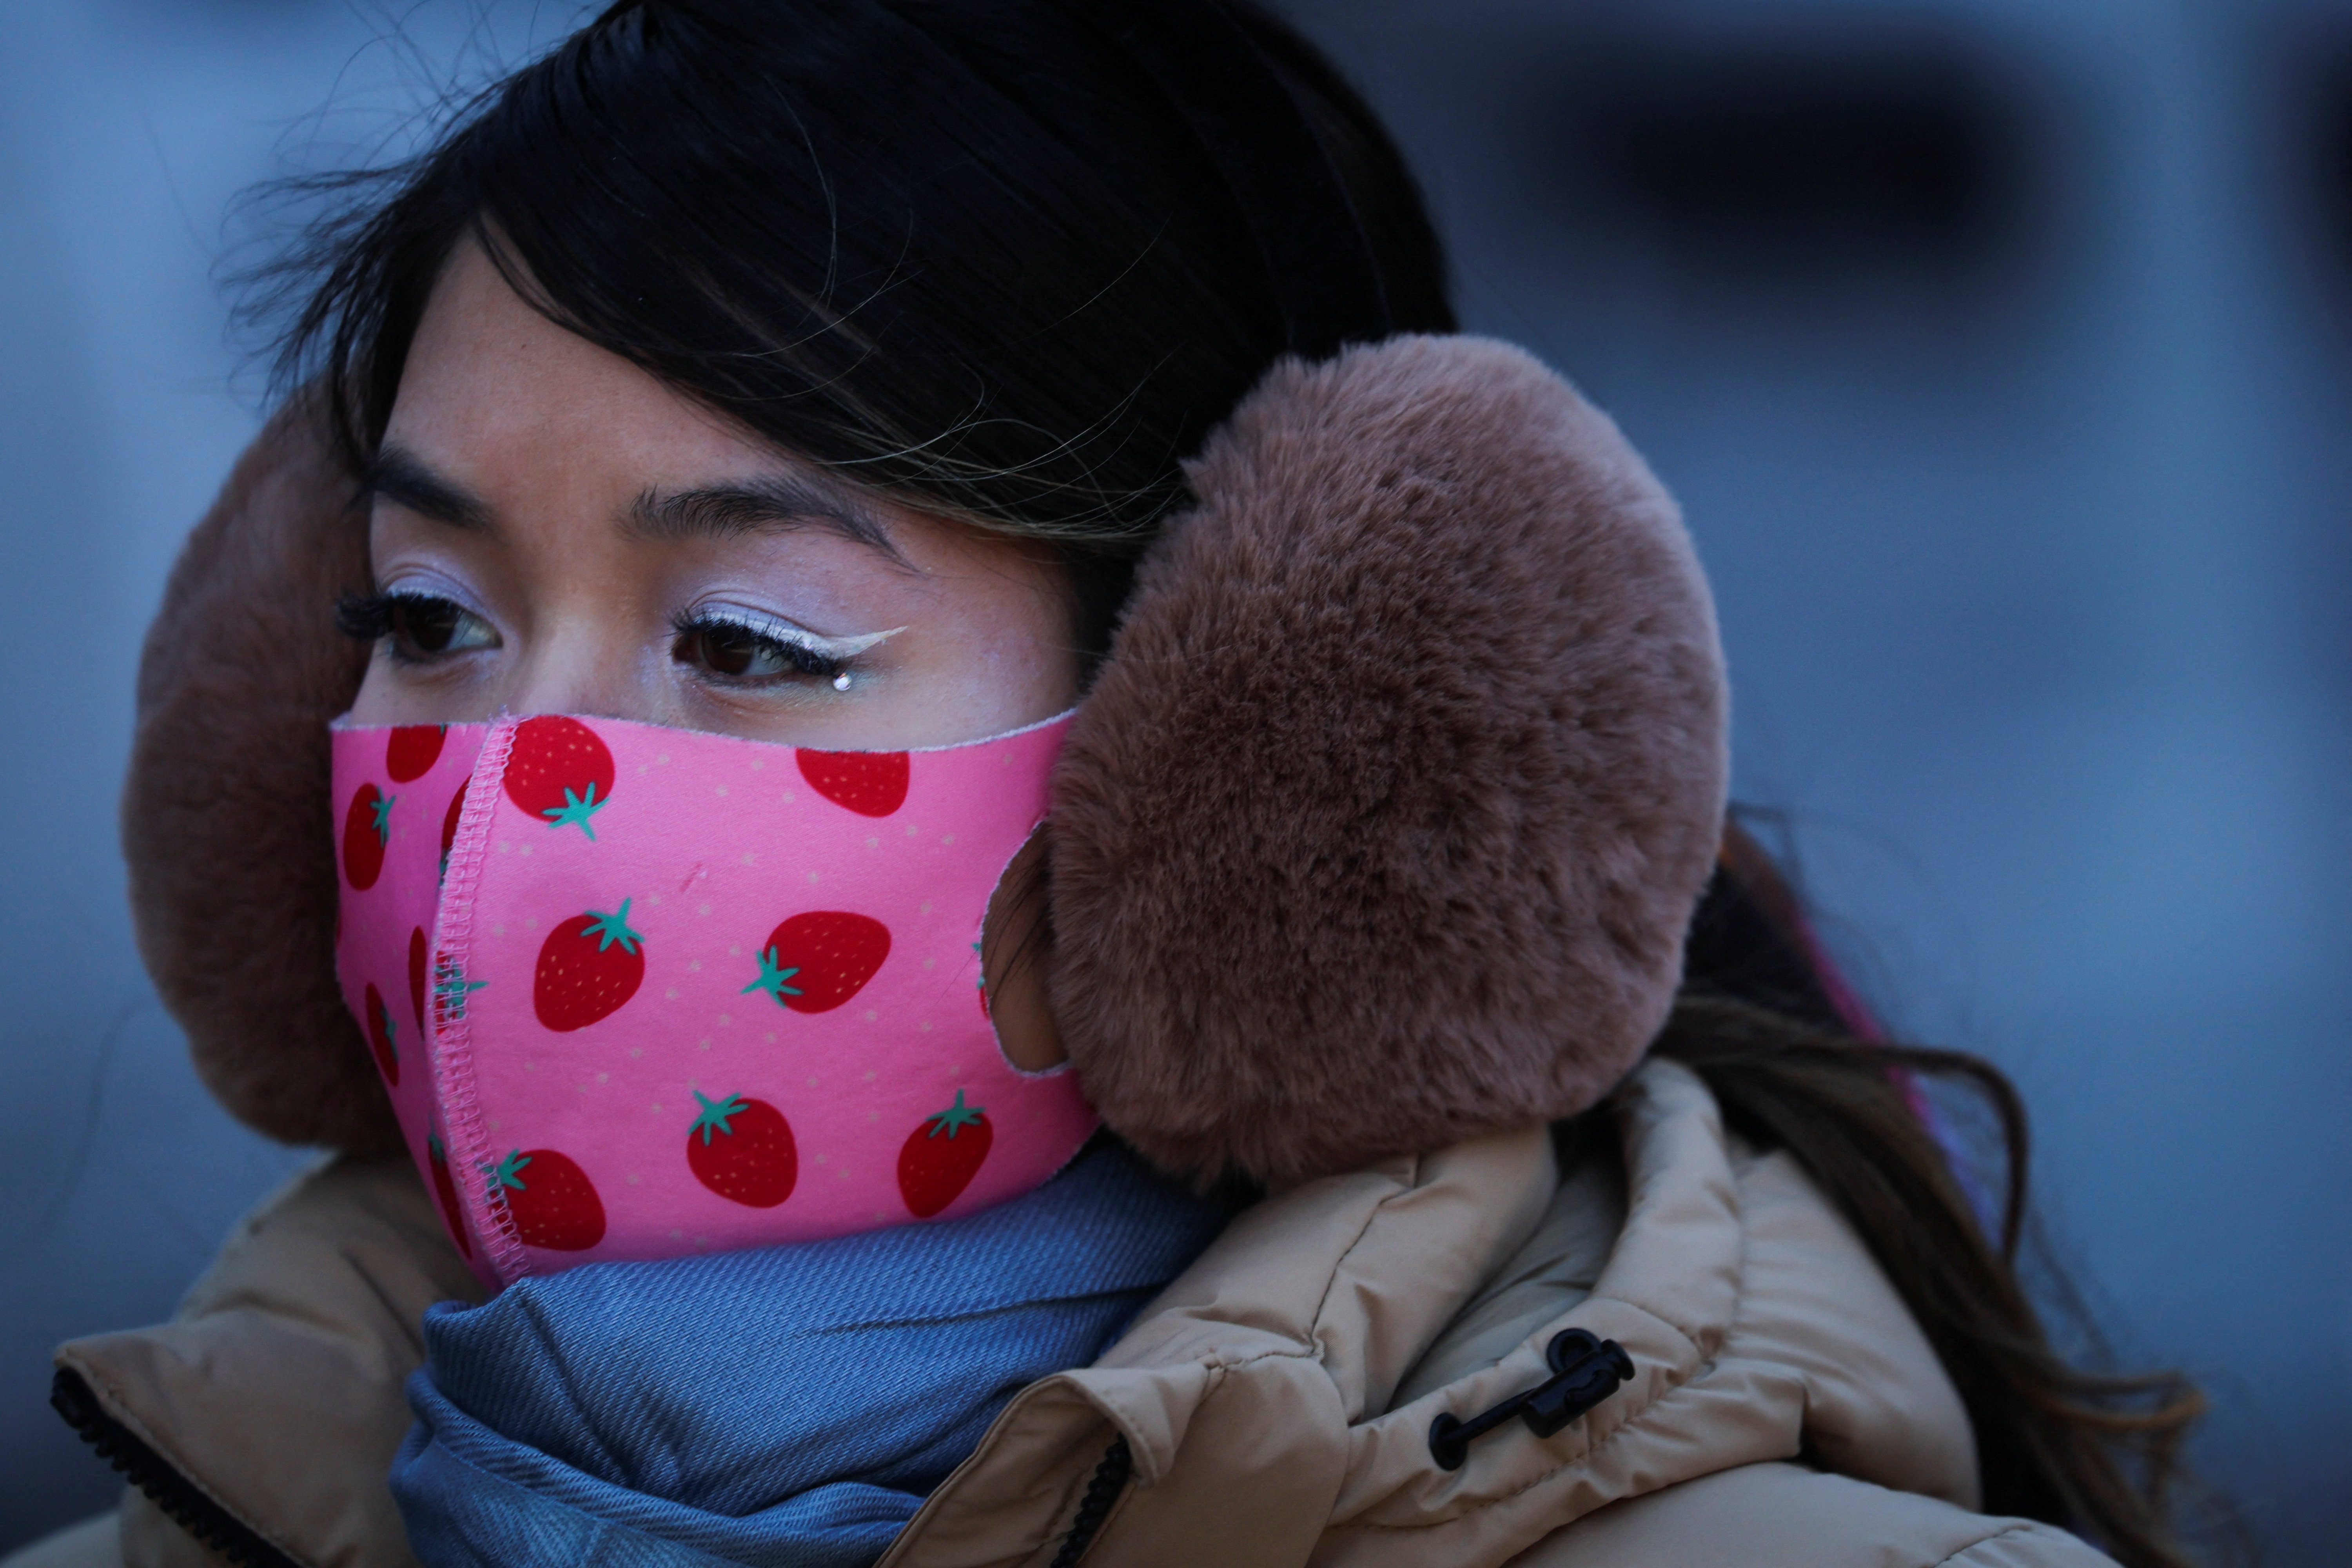 Woman wears a protective face mask and thick ear muffs during very cold temperatures in New York